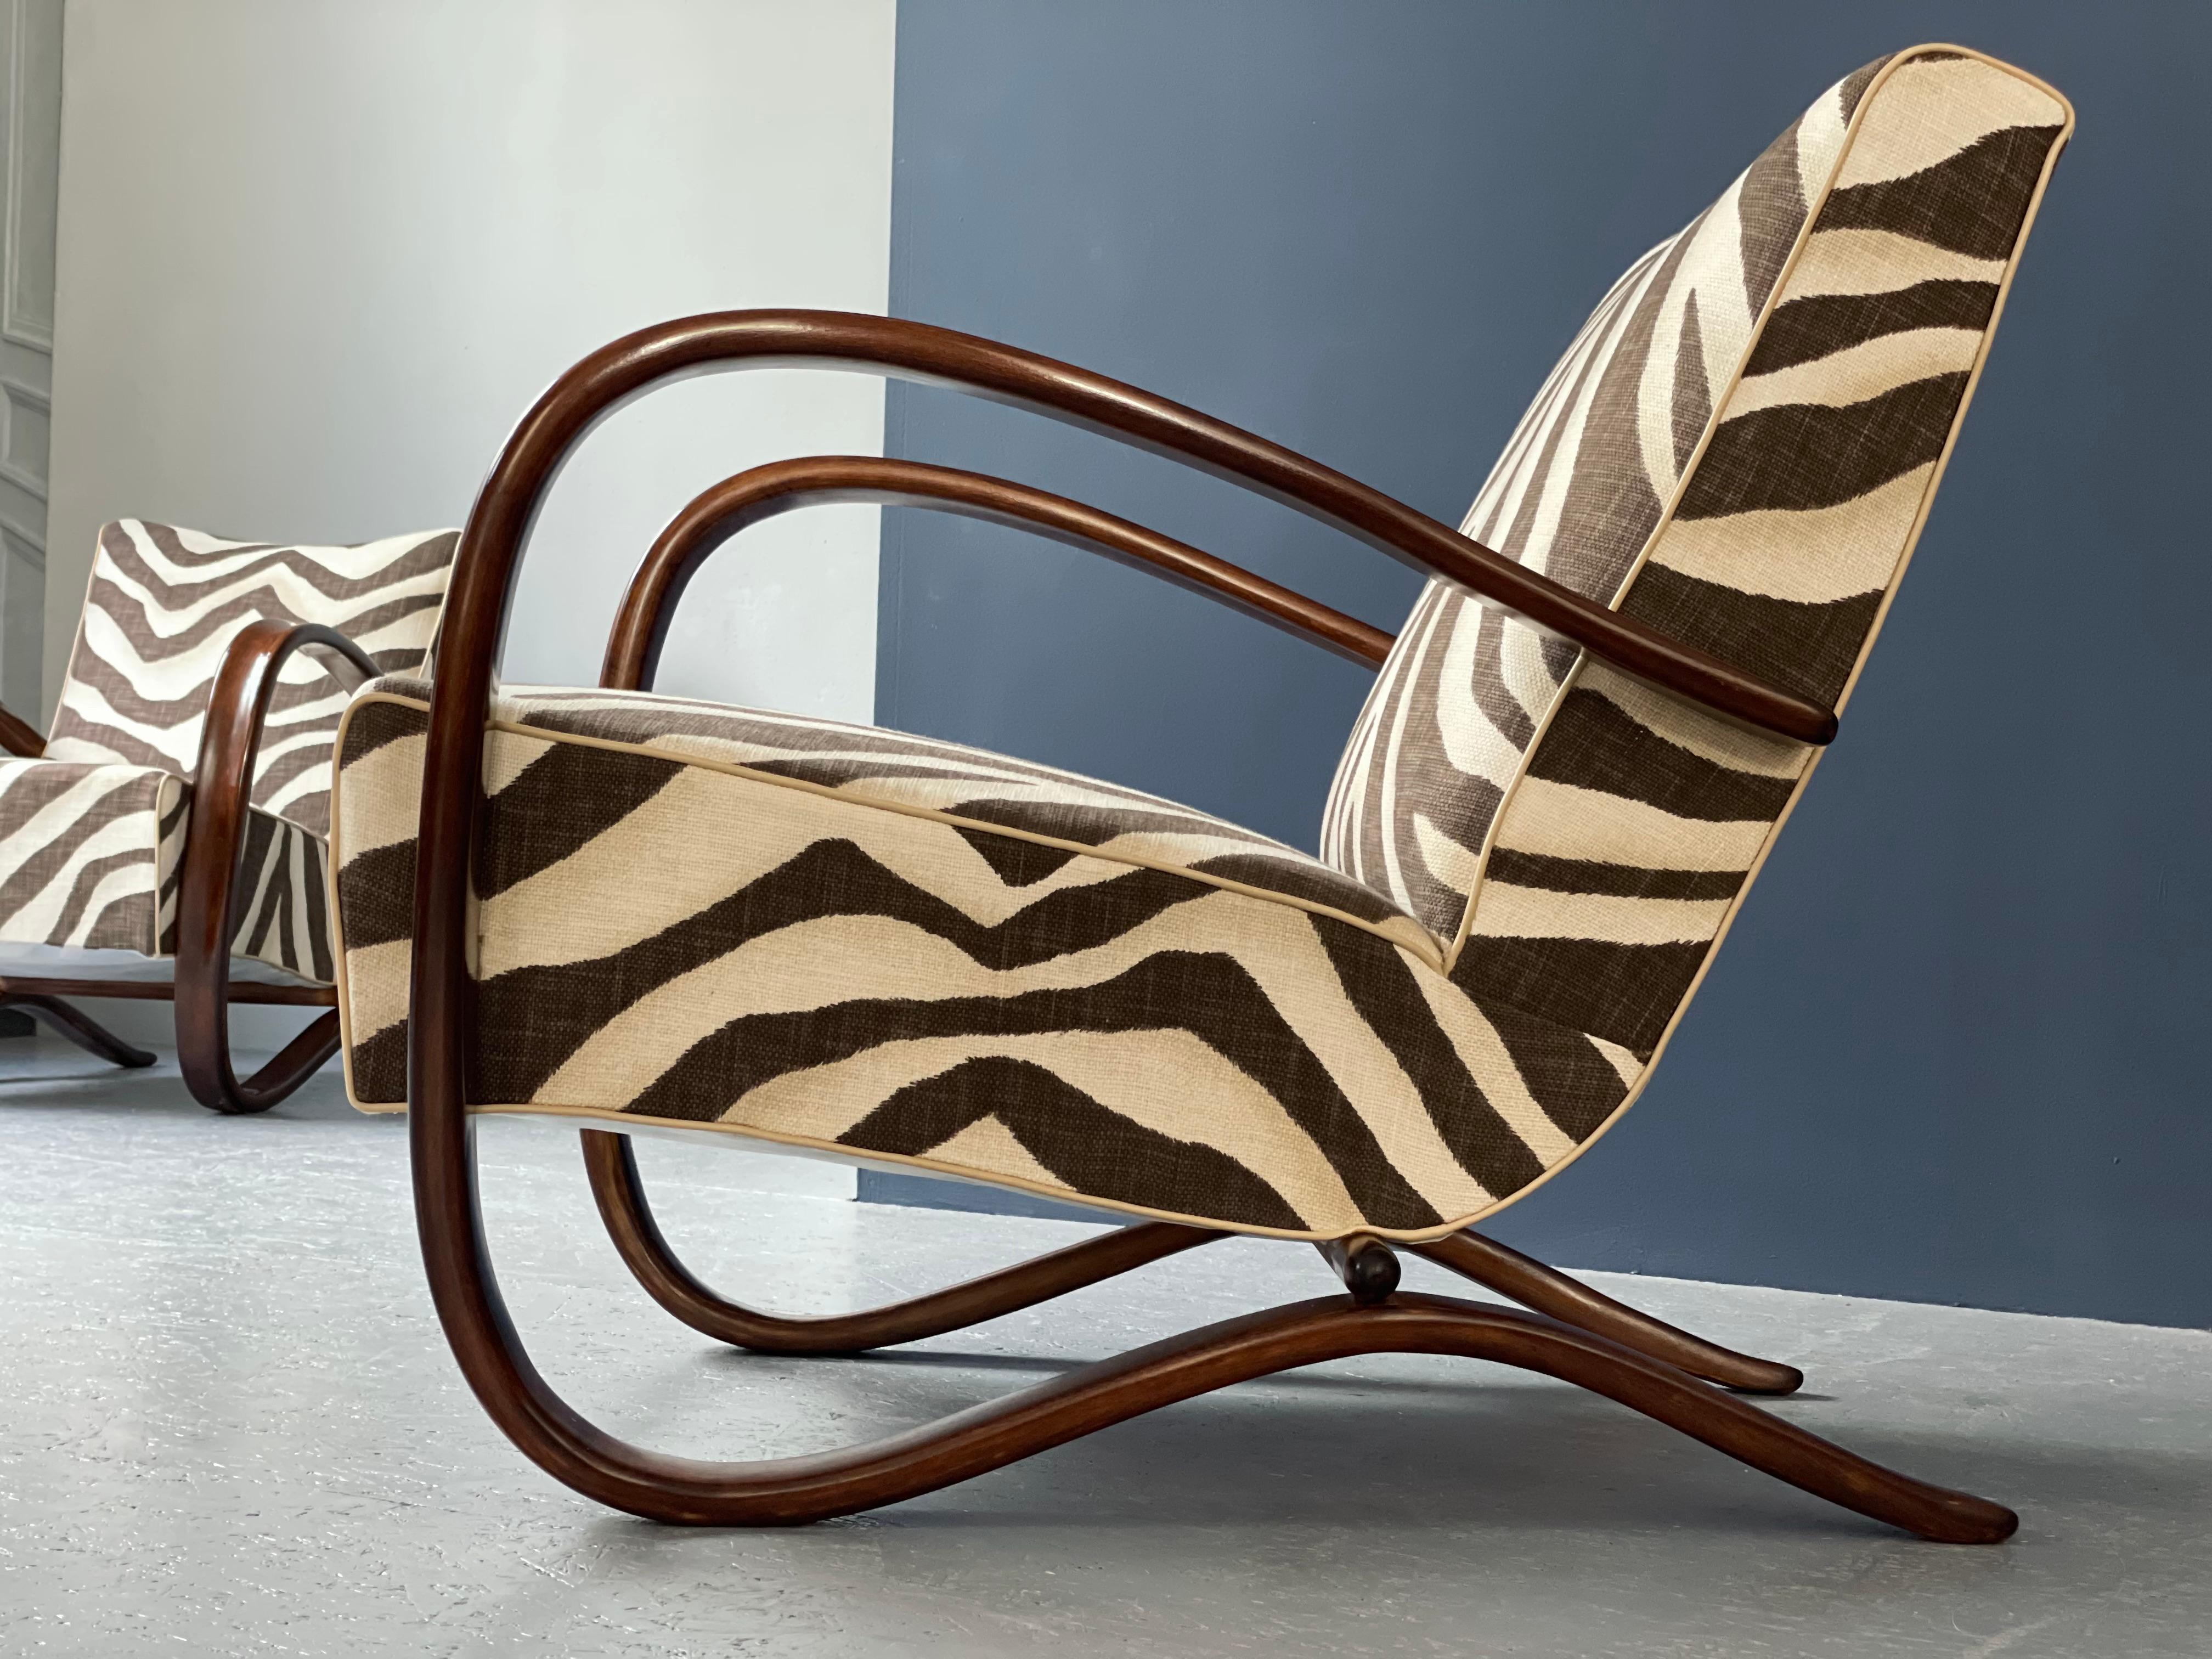 Created in Czechoslovakia by Jindrich Halabala in the 1930's this chair is one of the most recognizable pieces of it time. Newly upholstered with Ralph Lauren Zebra fabric this mid-century piece with its freshly lacquered Bent Beachwood frame is an